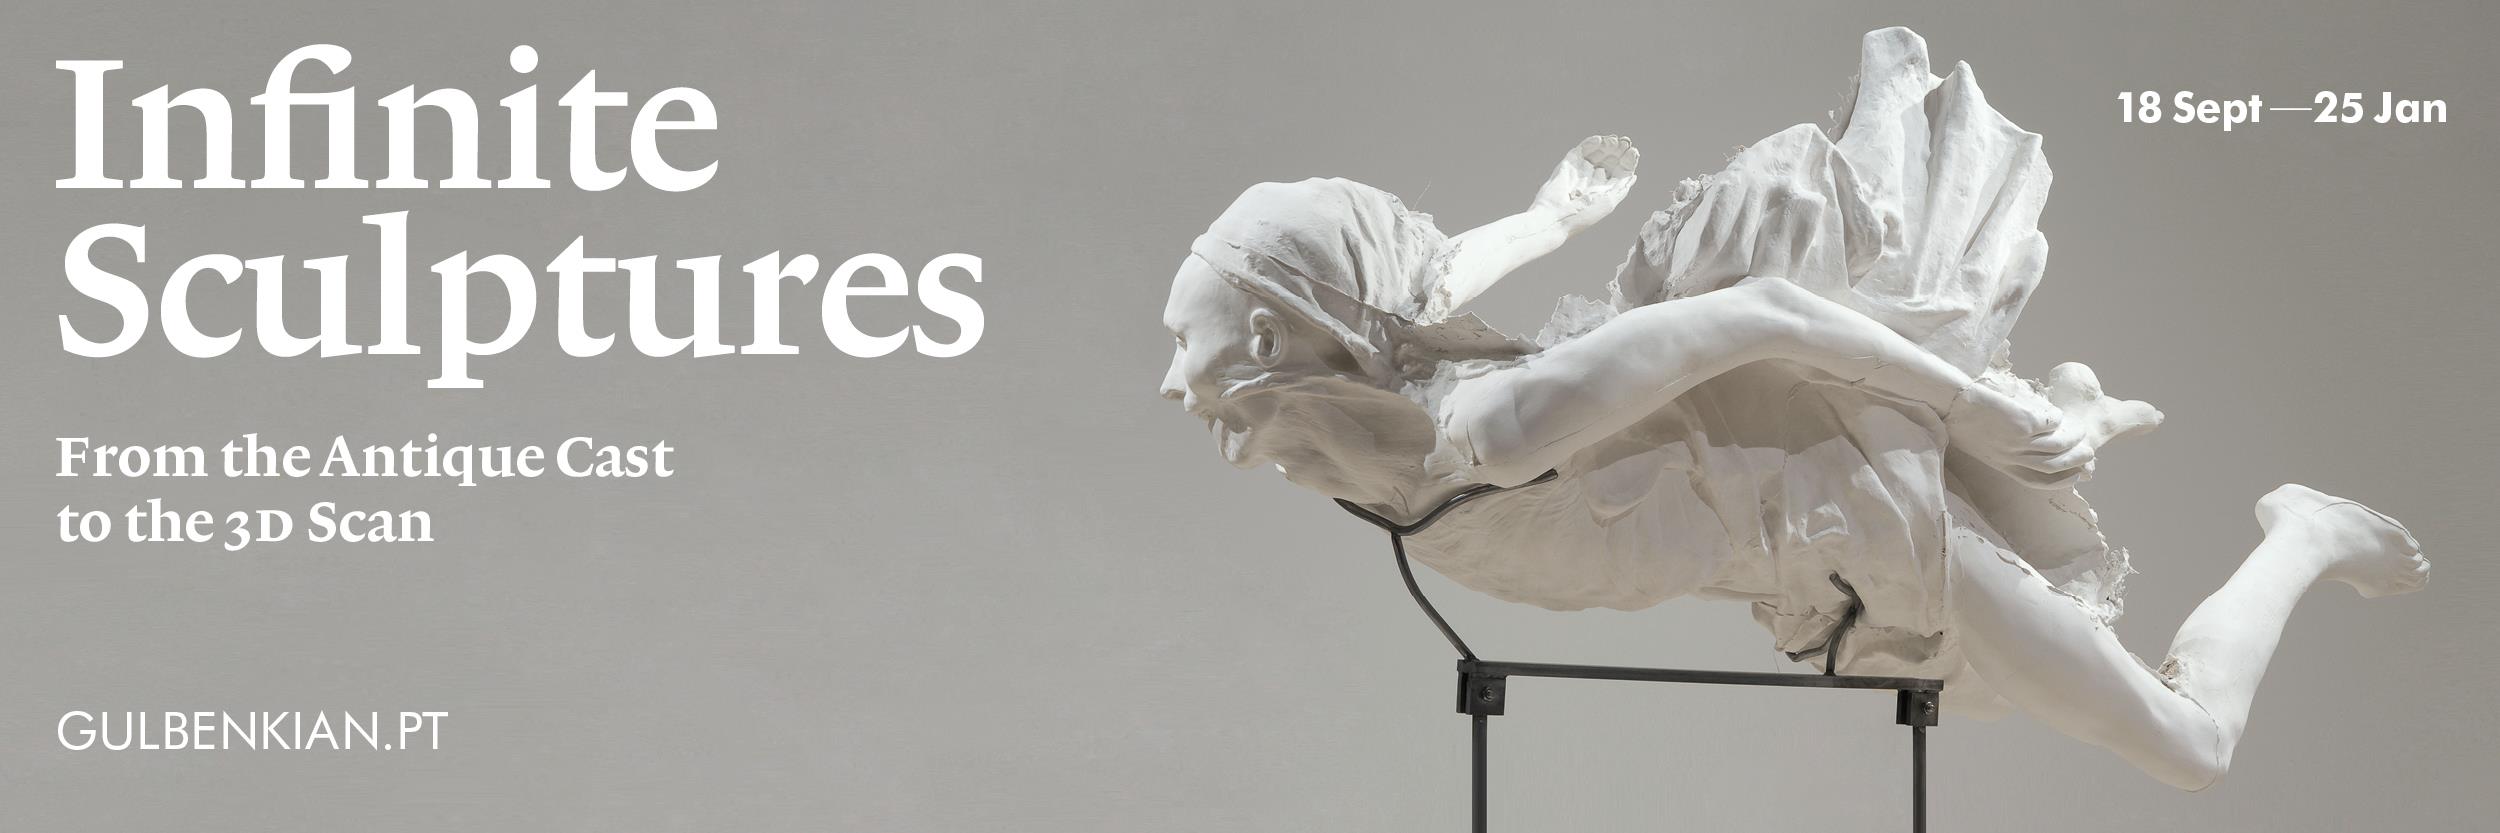 Infinite Sculptures. From the Antique Cast to the 3D Scan